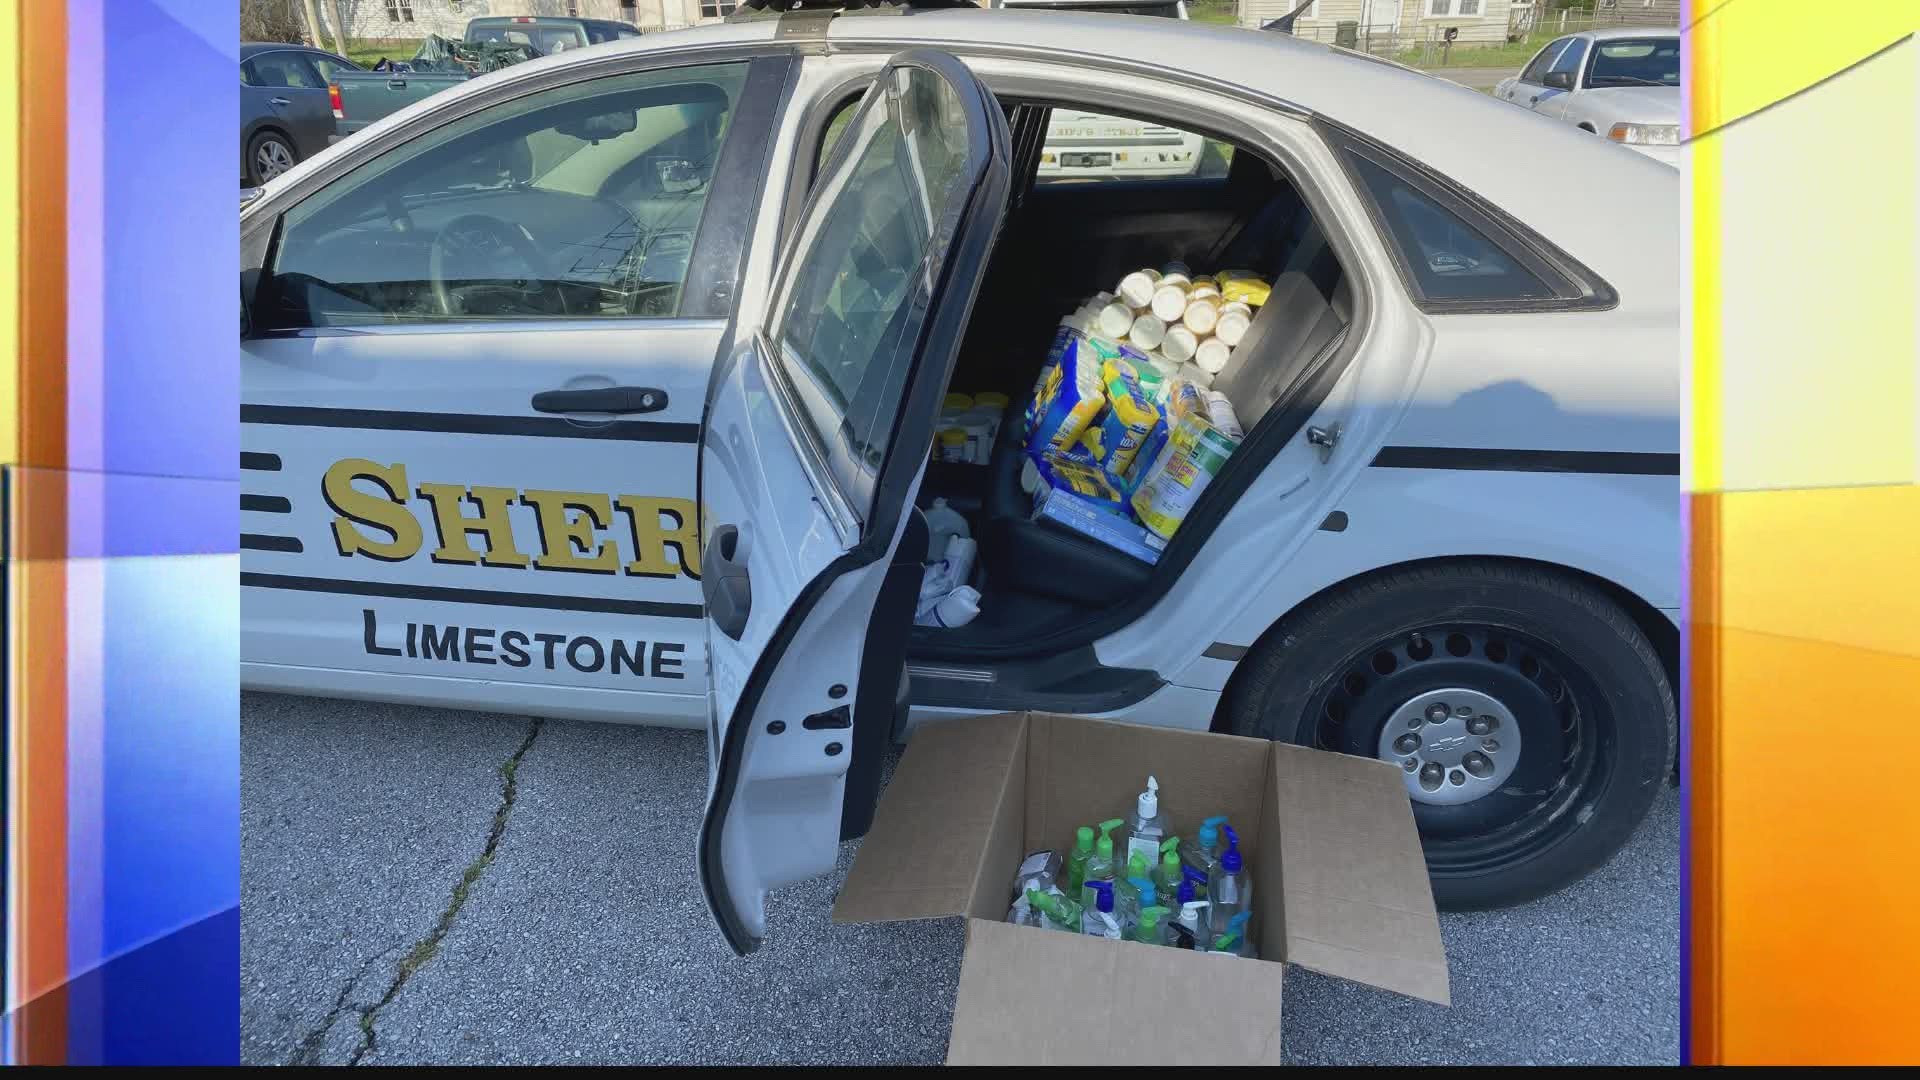 Local groups banded together to get deputies cleaning wipes, hand sanitizer, and face shields.